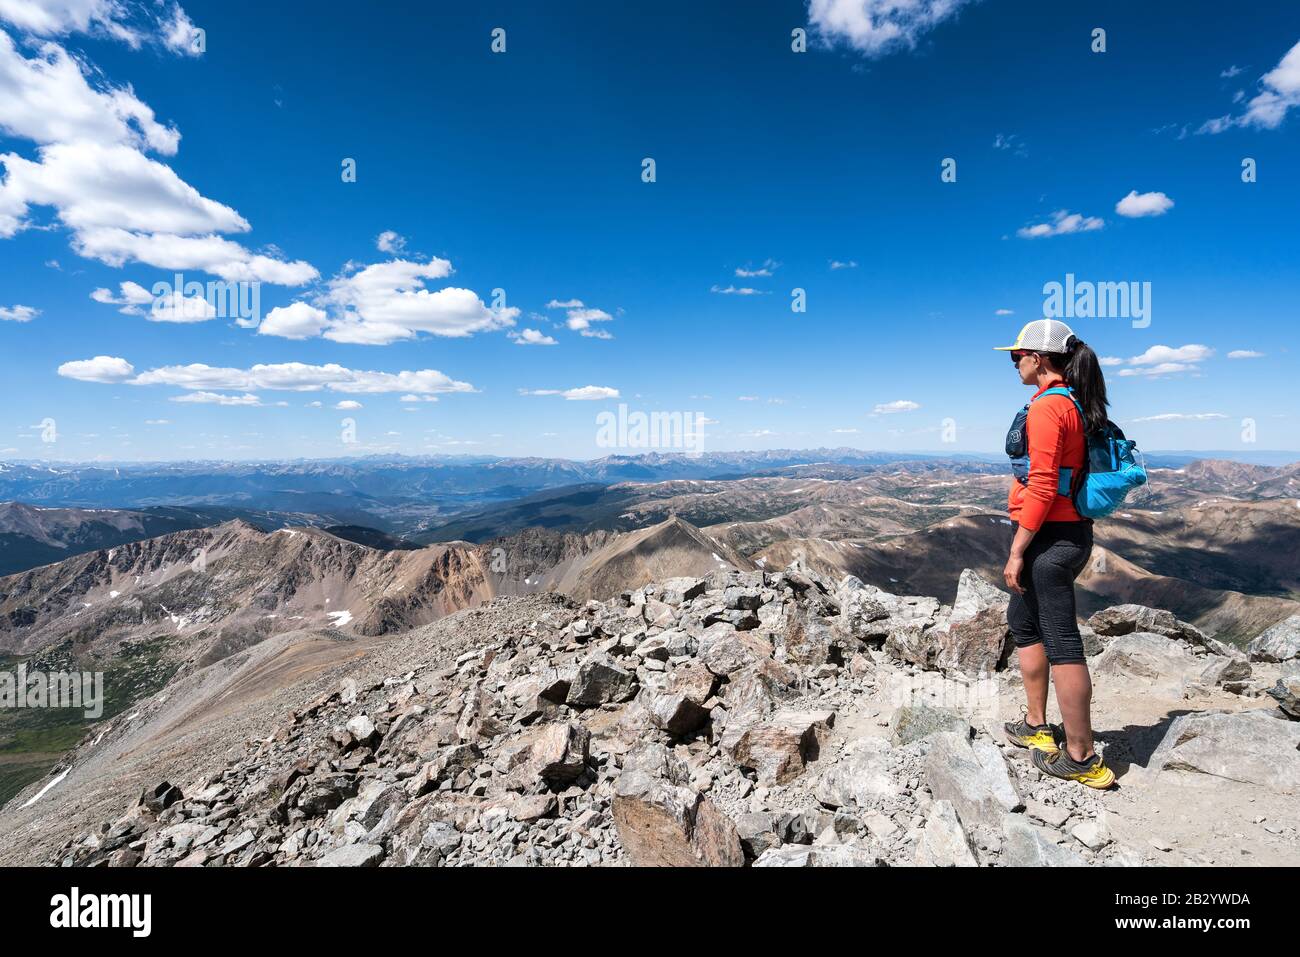 At the summit of Torreys Peak in Colorado, USA Stock Photo